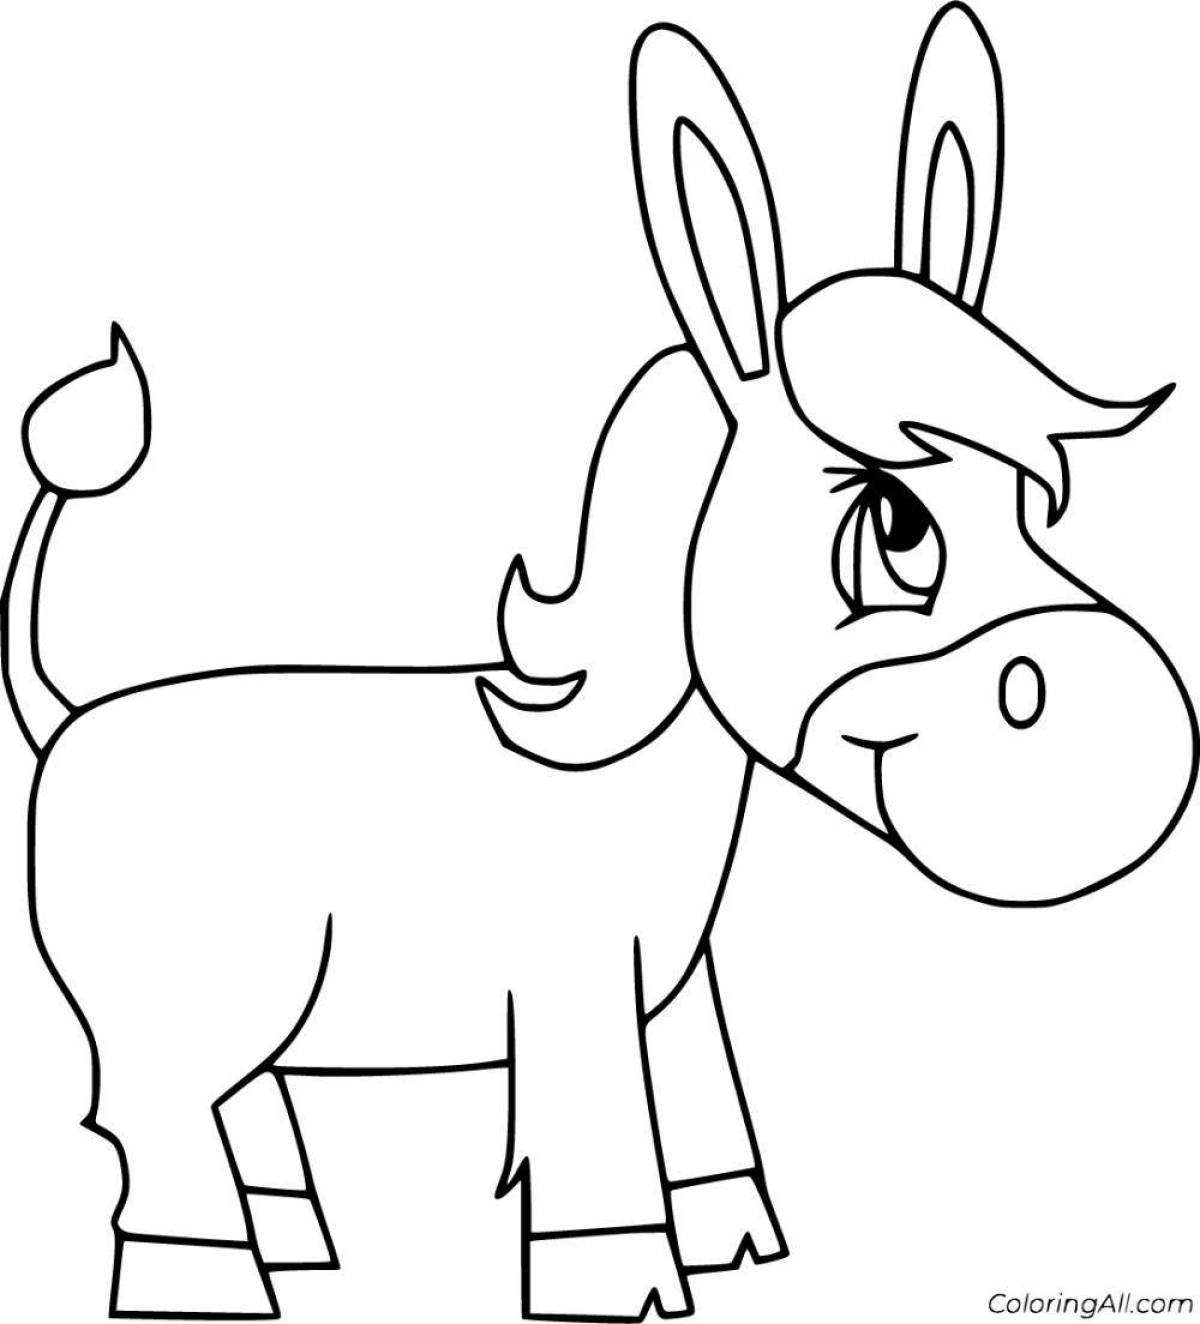 Animated coloring donkey for kids